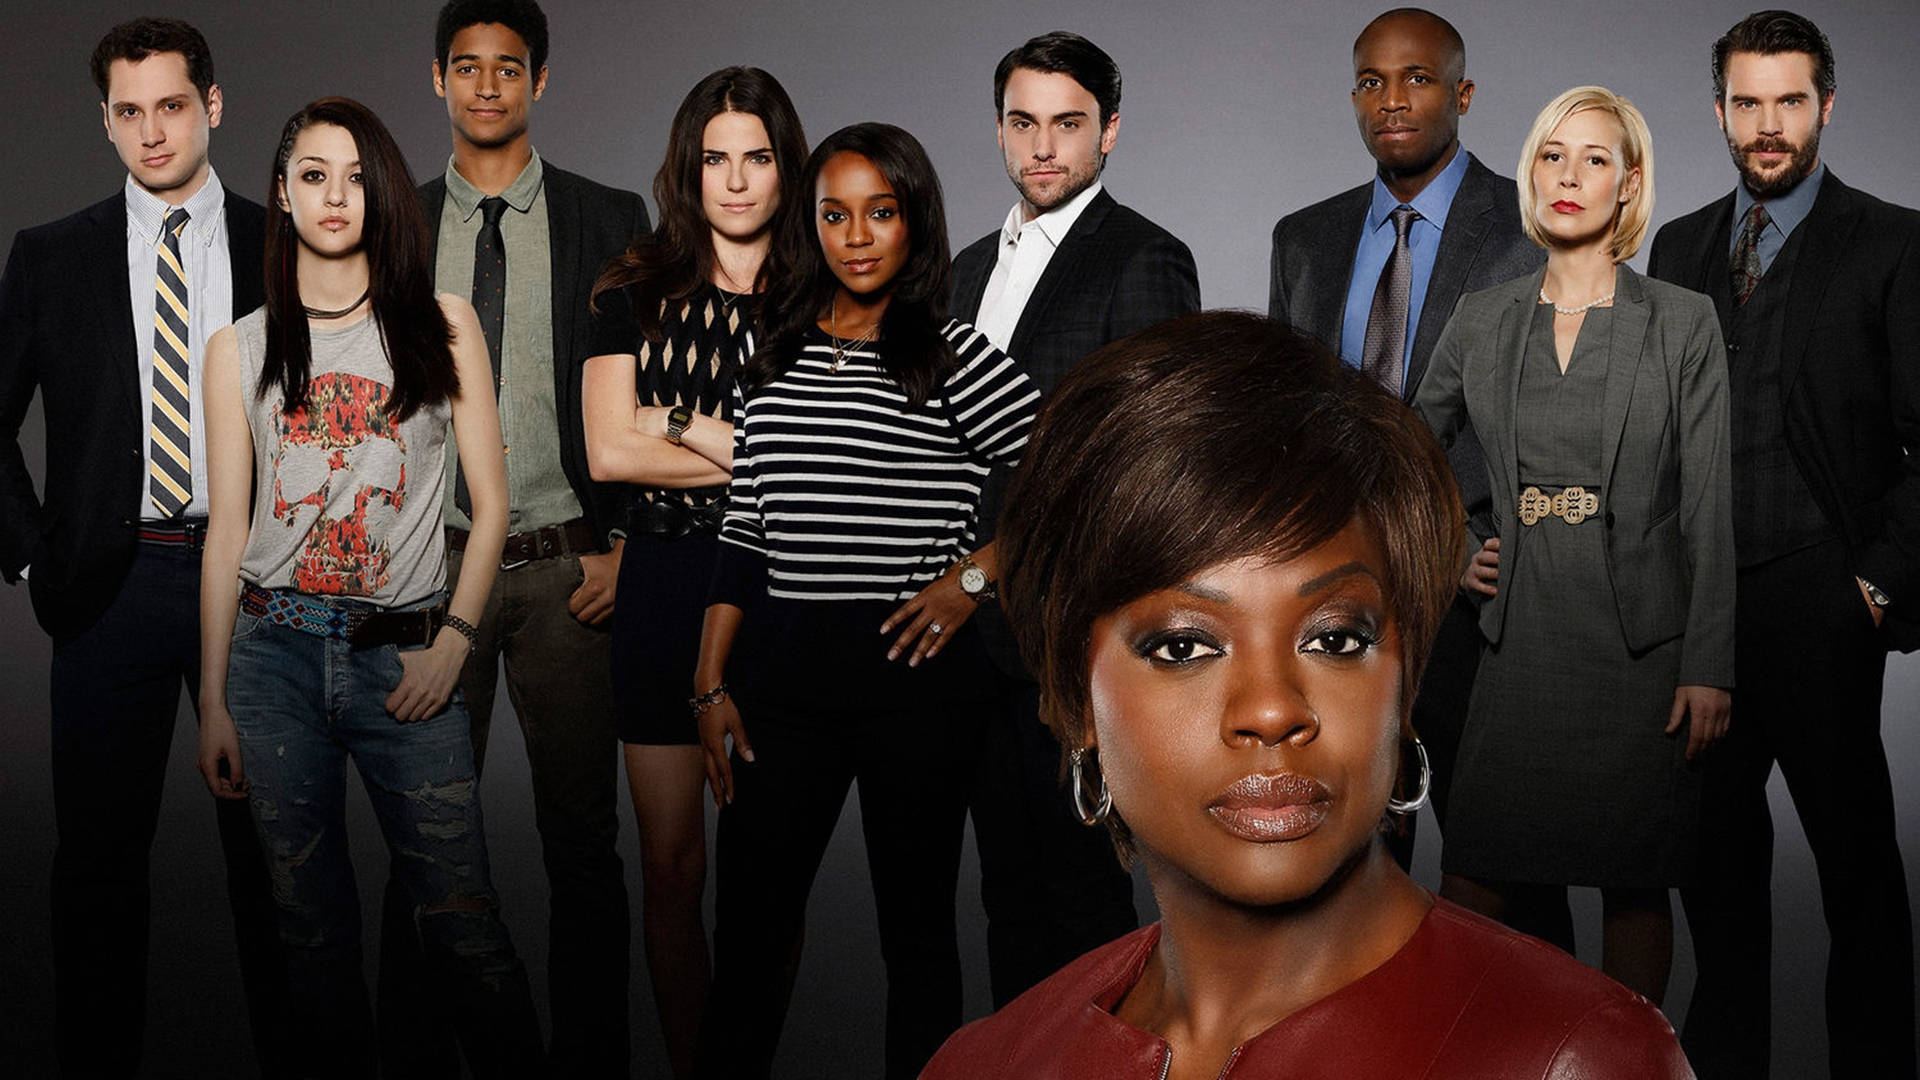 Main Characters From The Popular Tv Series, 'how To Get Away With Murder' Background